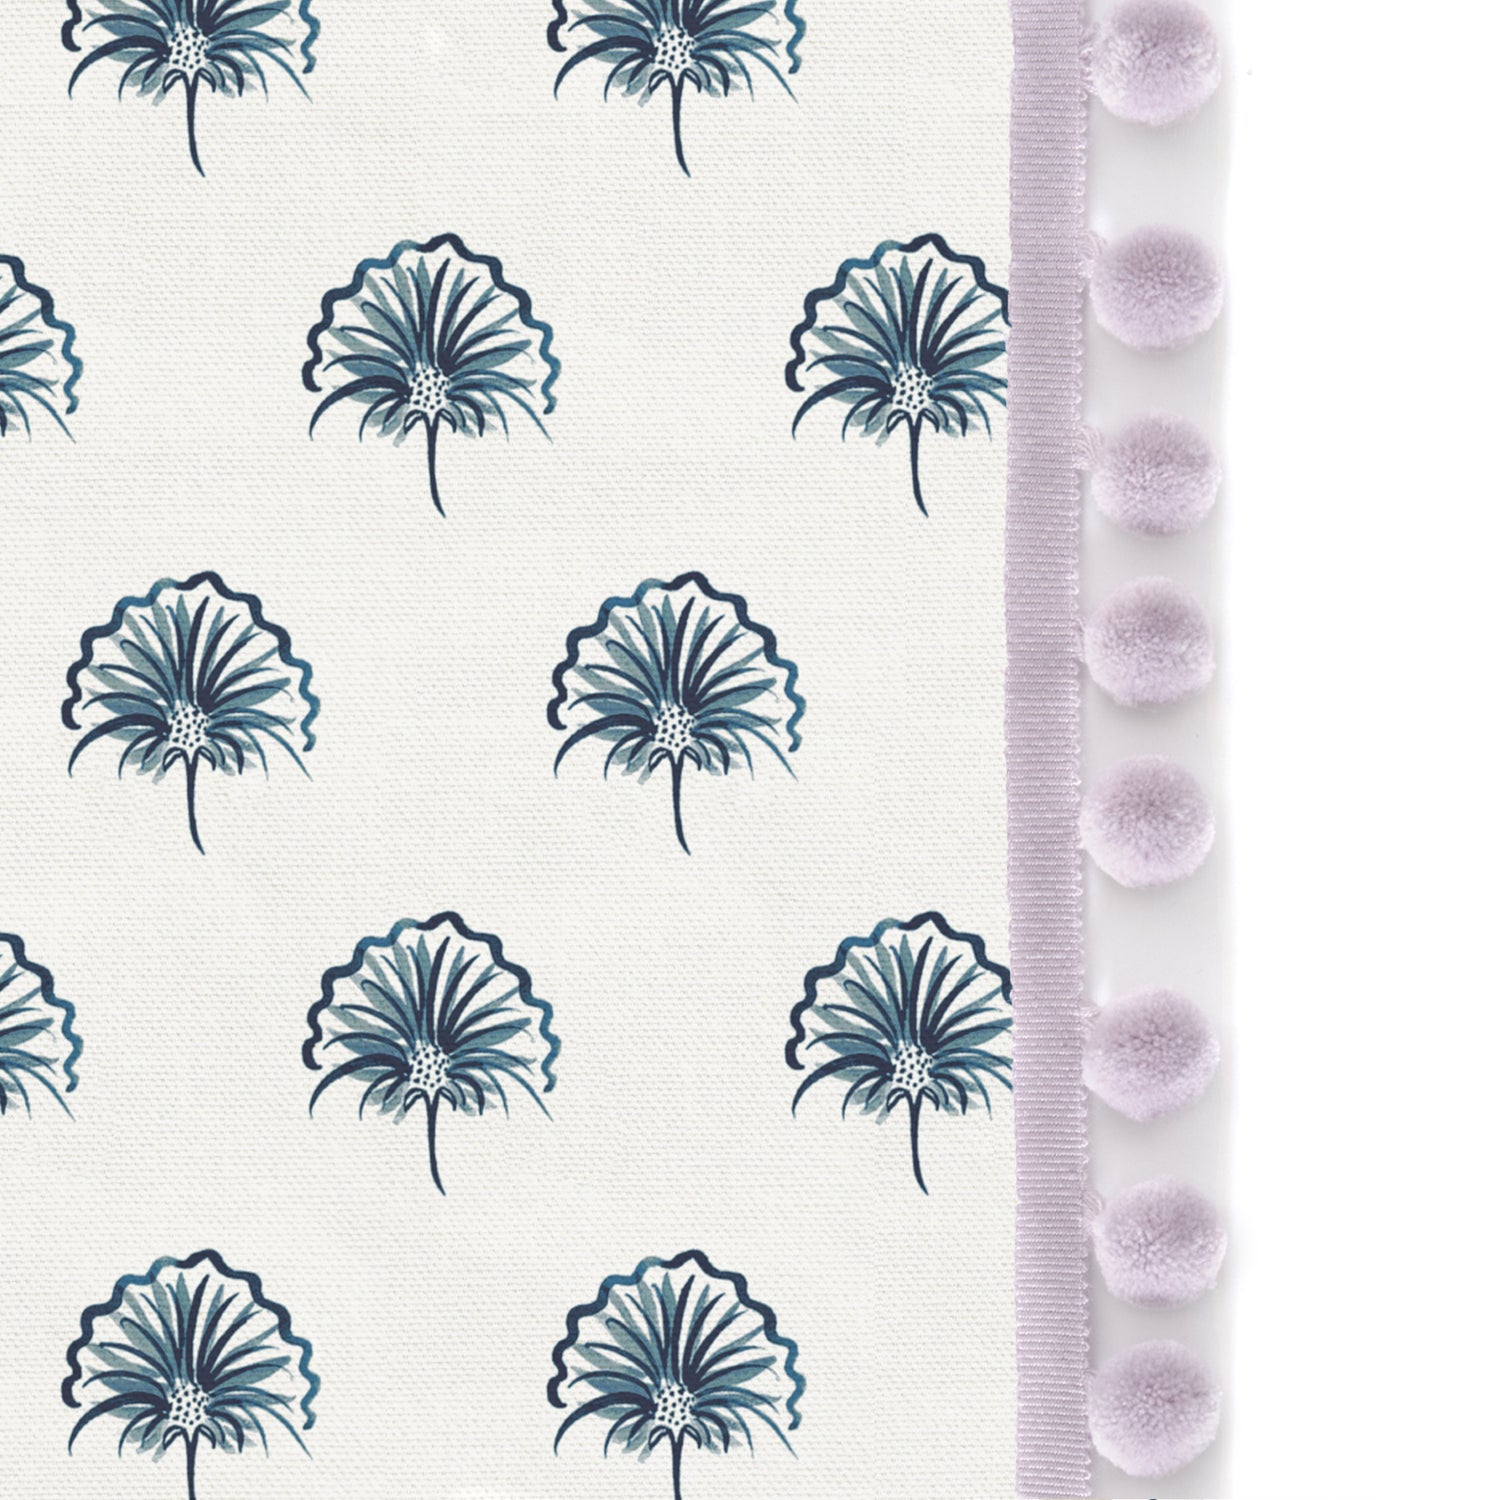 Upclose picture of Penelope Midnight custom Floral Navyshower curtain with lilac pom pom trim